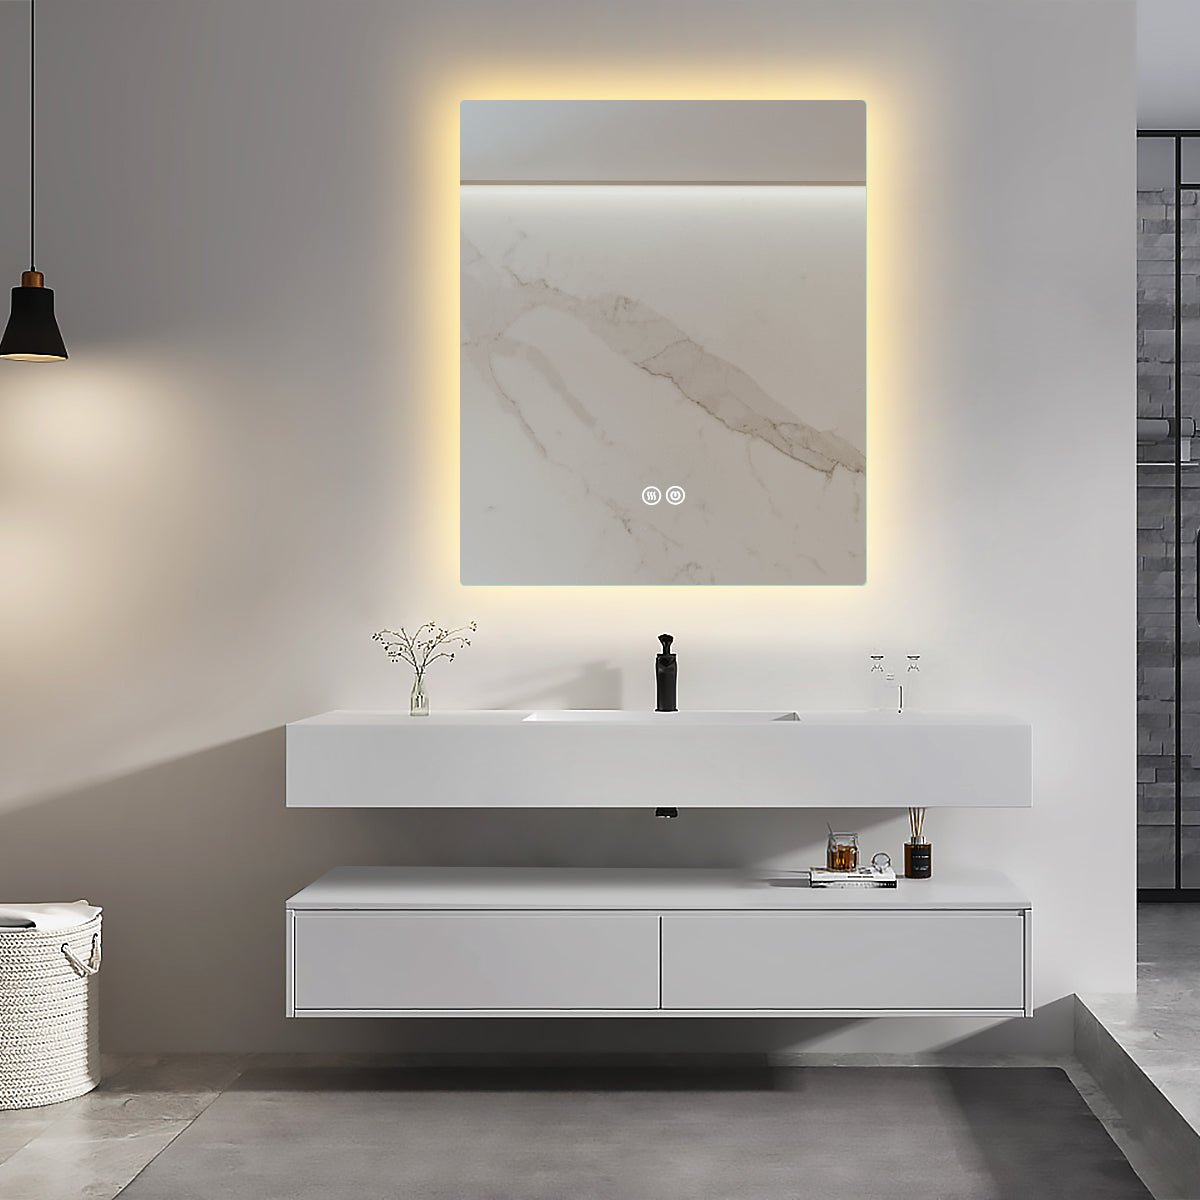 Backlit LED Mirror with a Demister, Three Brightness Levels, And A Convenient Dimmer - Mirror World